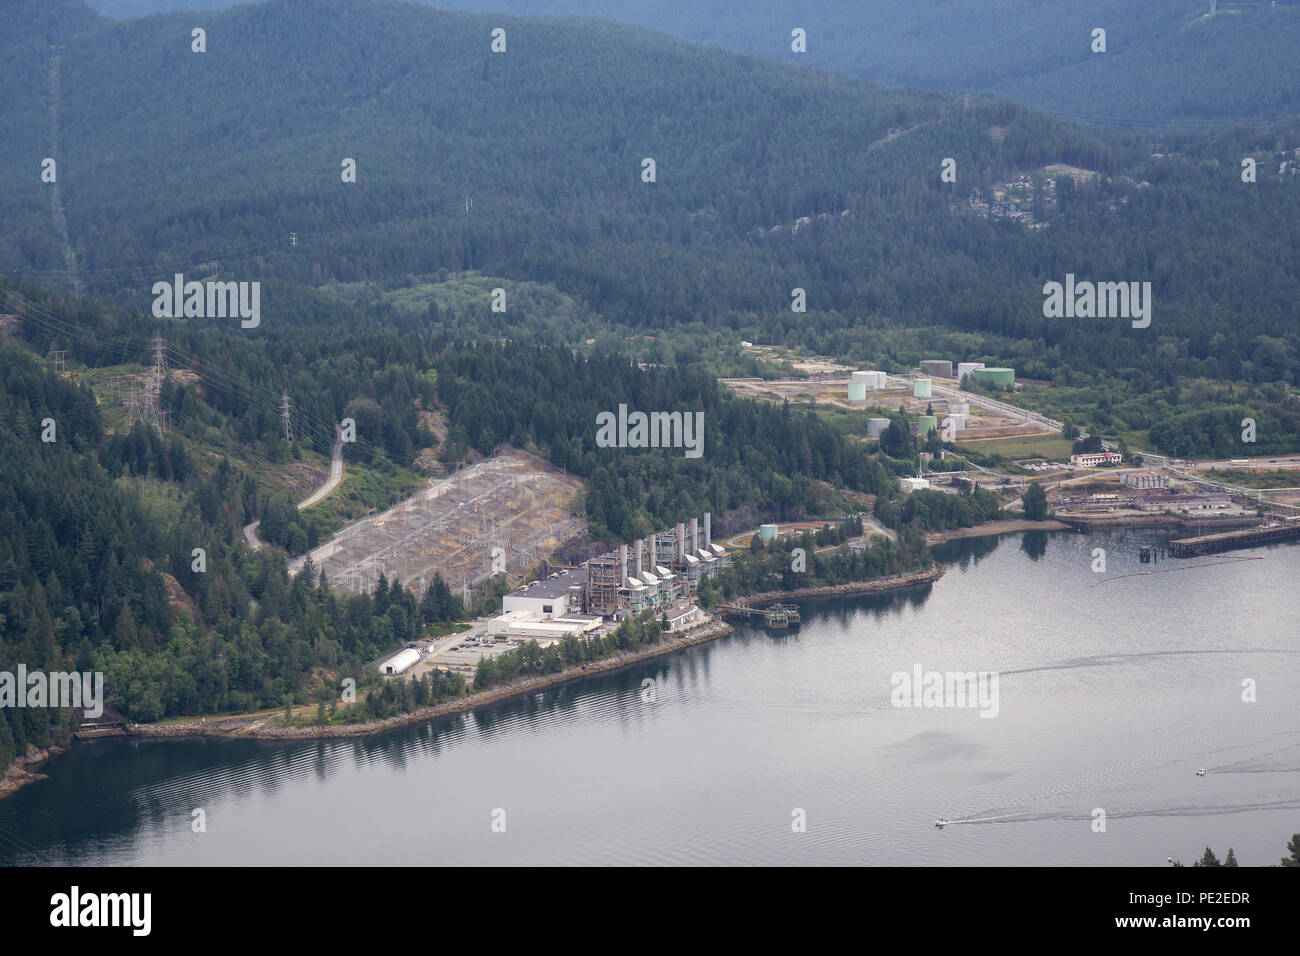 Aerial view of industrial sites in Port Moody. Taken from Burnaby Mountain, Vancouver, British Columbia, Canada. Stock Photo